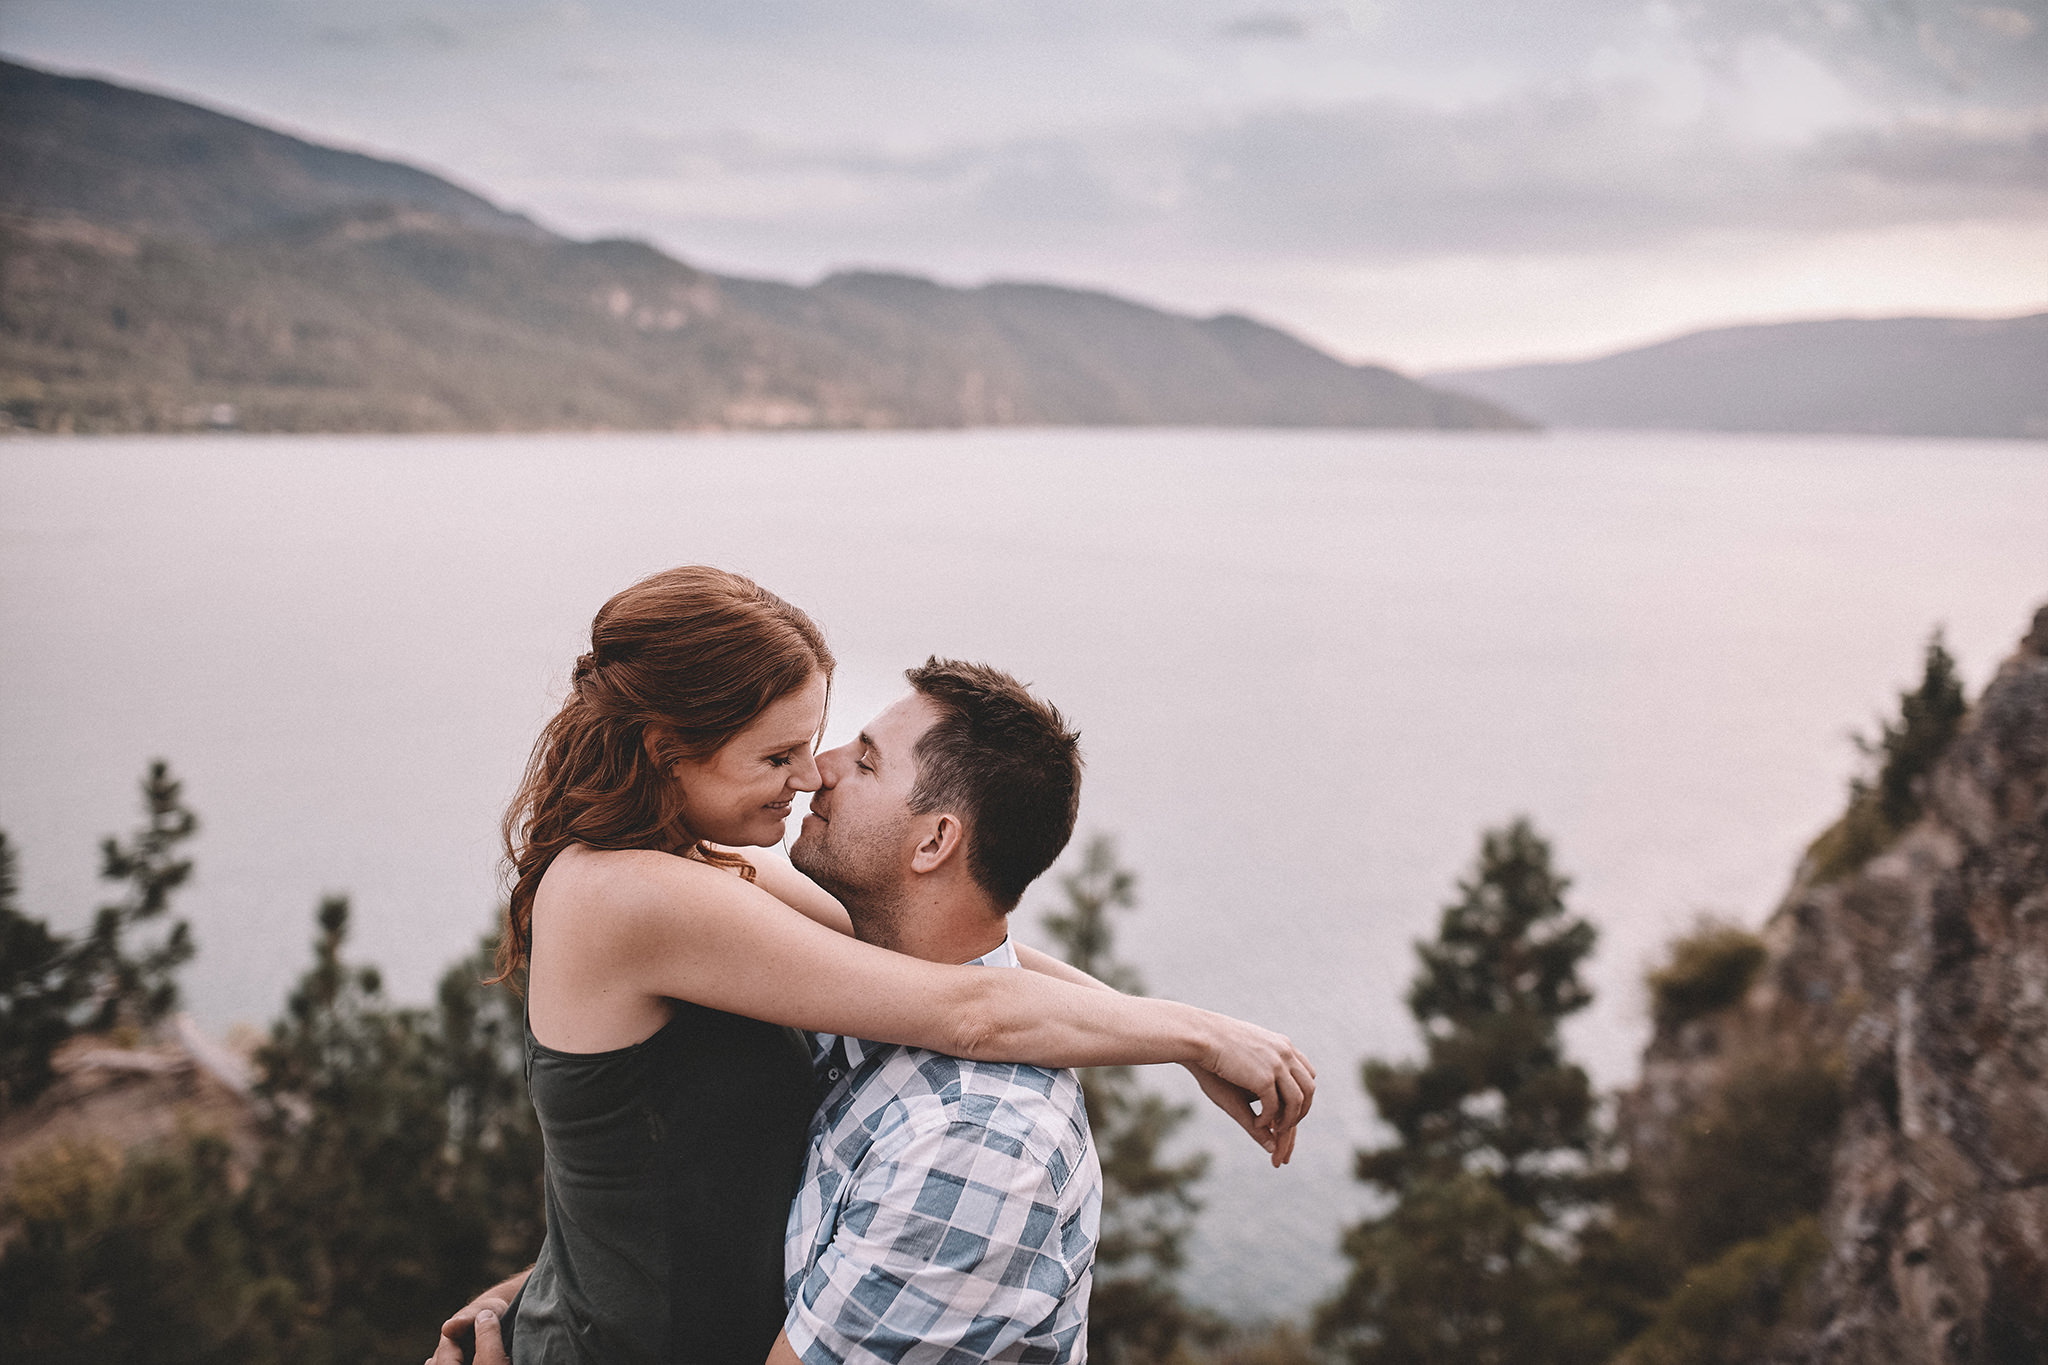 A couple hold each other and kiss with a big lake in the background